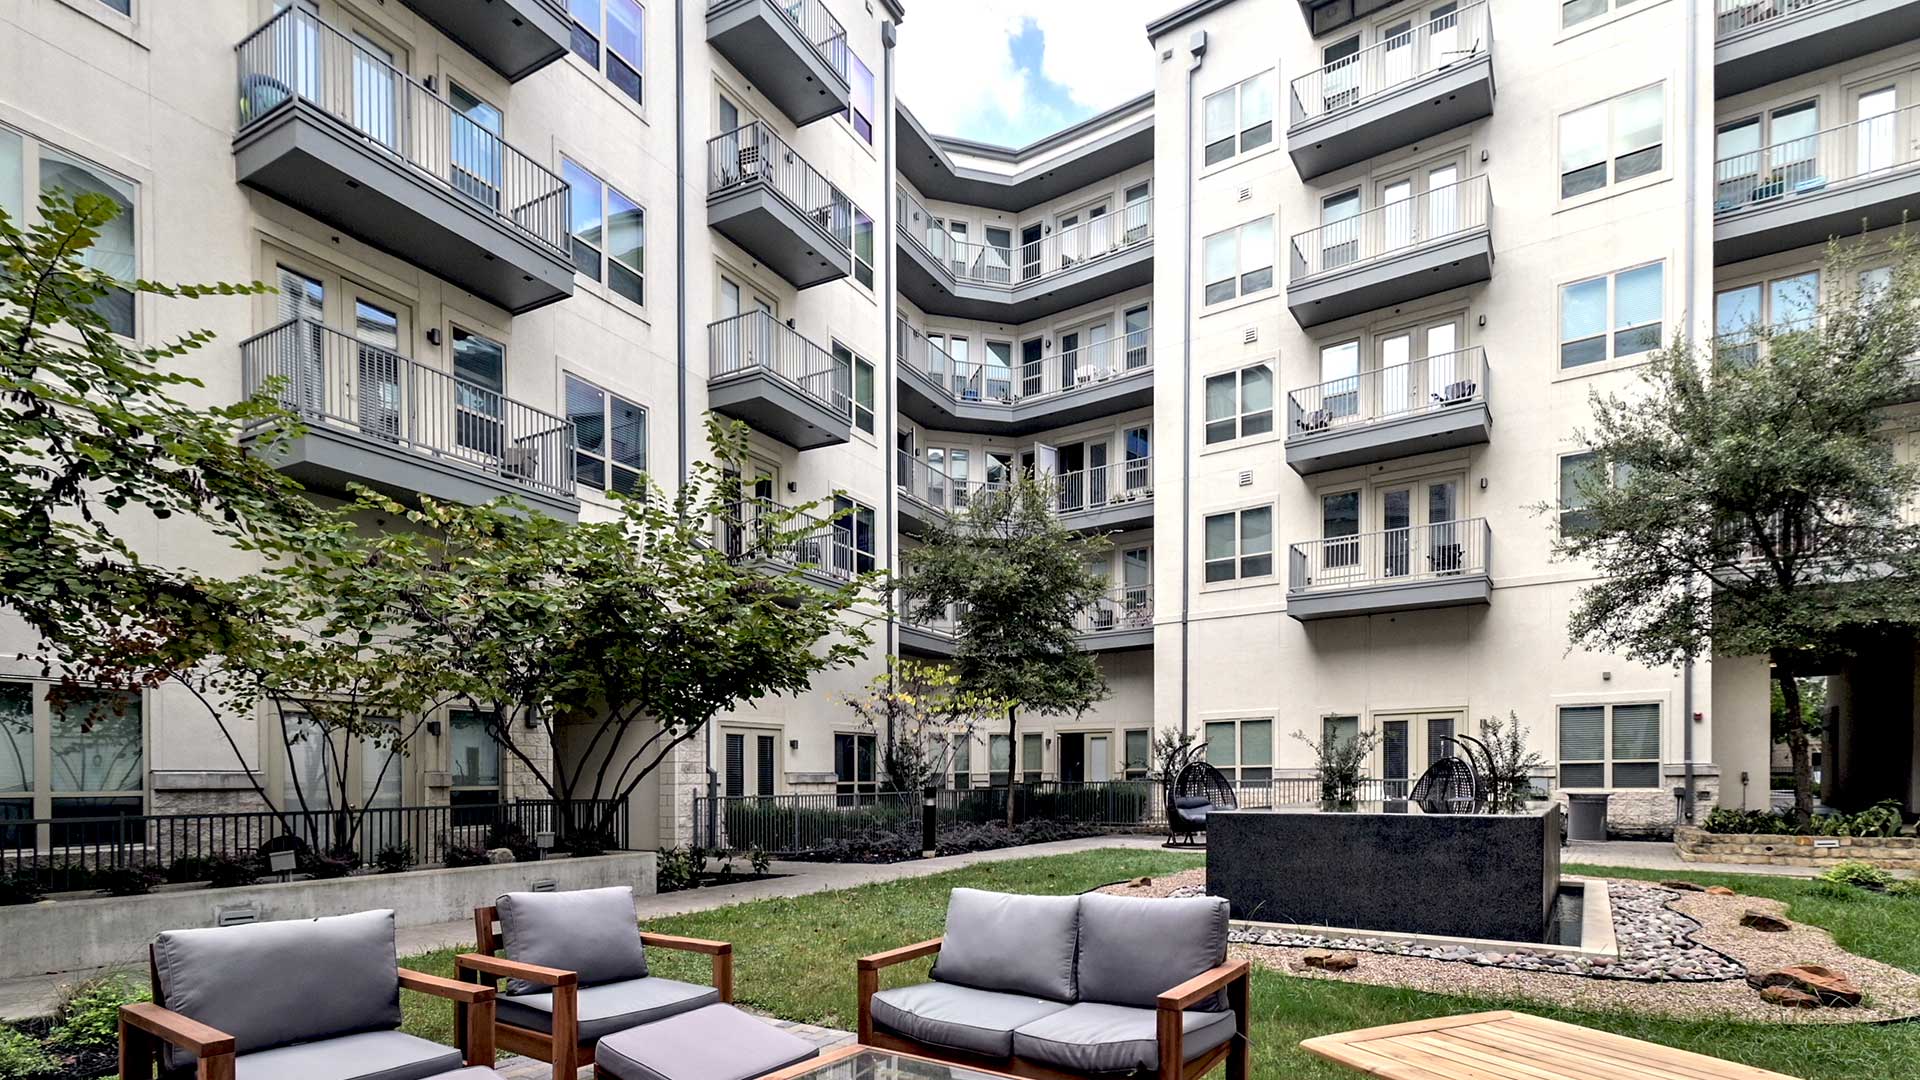 Looking at grey cushioned outdoor furniture and a wooden table set sitting before the black, square fountain in the Zen Courtyard. The apartment building is seen behind.